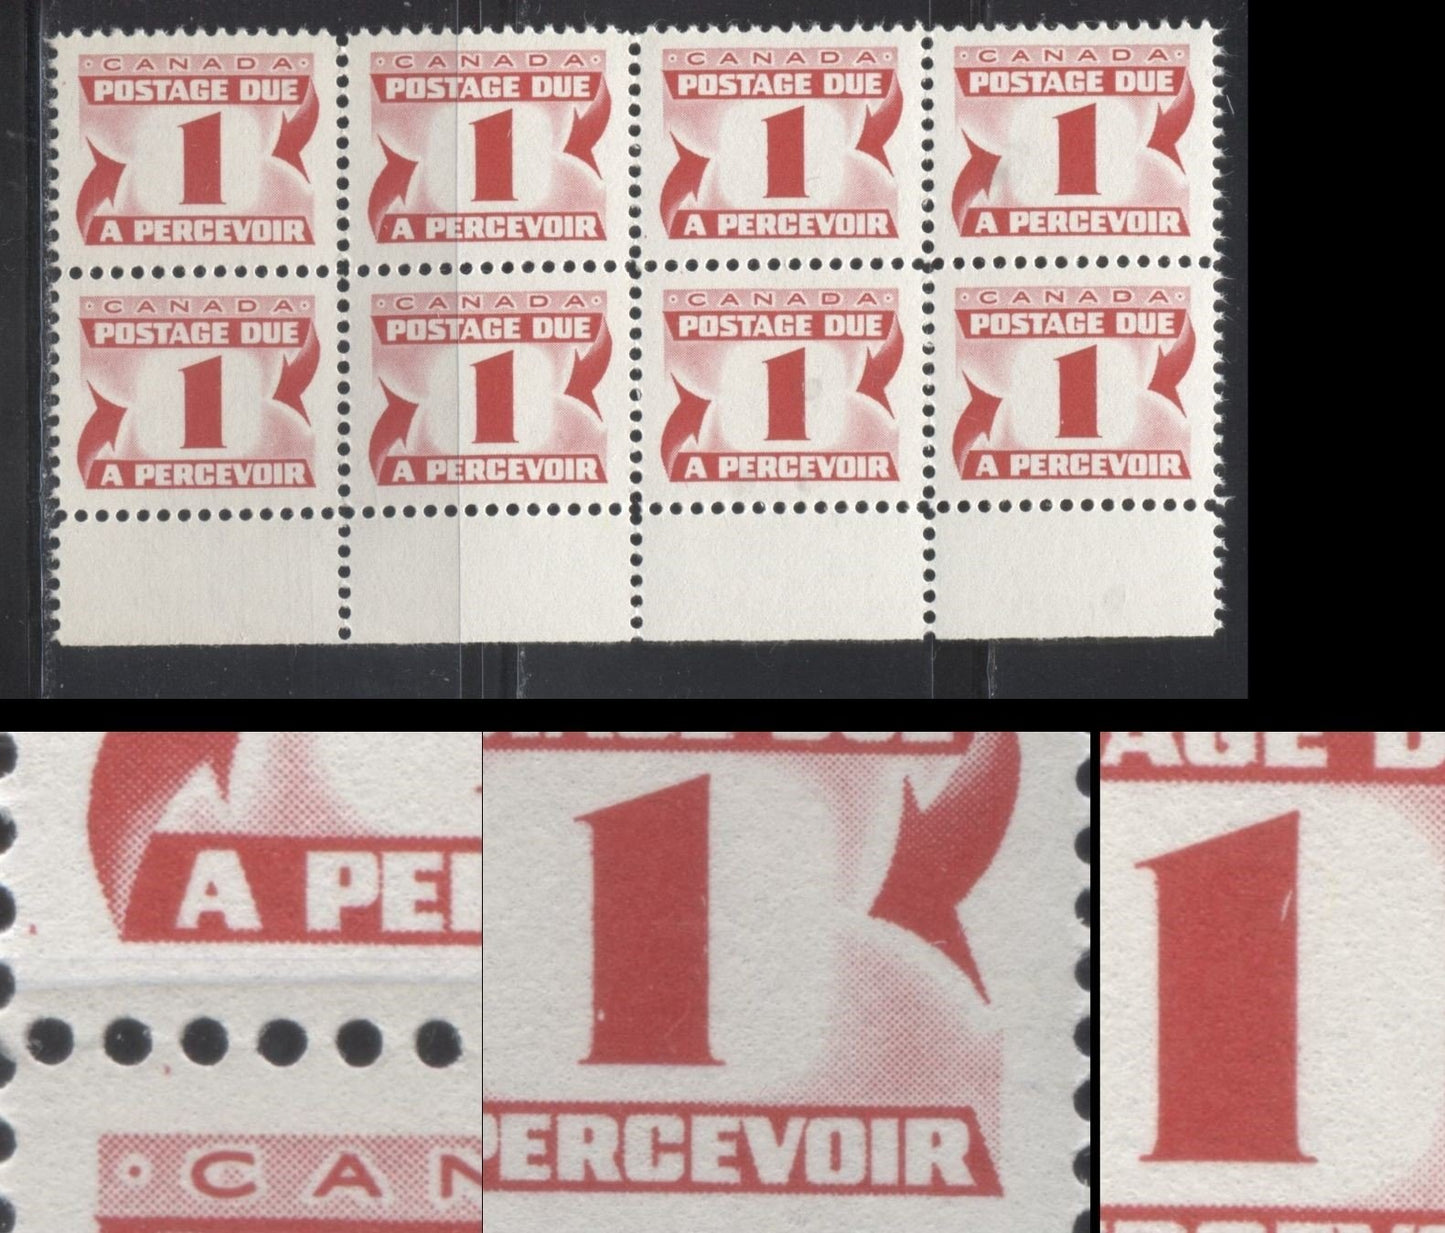 Lot 37 Canada #J28 1c Carmine Rose 1969 Second Centennial Postage Due Issue, A VFNH Lower Margin Inscription Block Of 8 On DF Grayish White Paper With Streaky Dex Gum, Perf 12, Plate Varieties